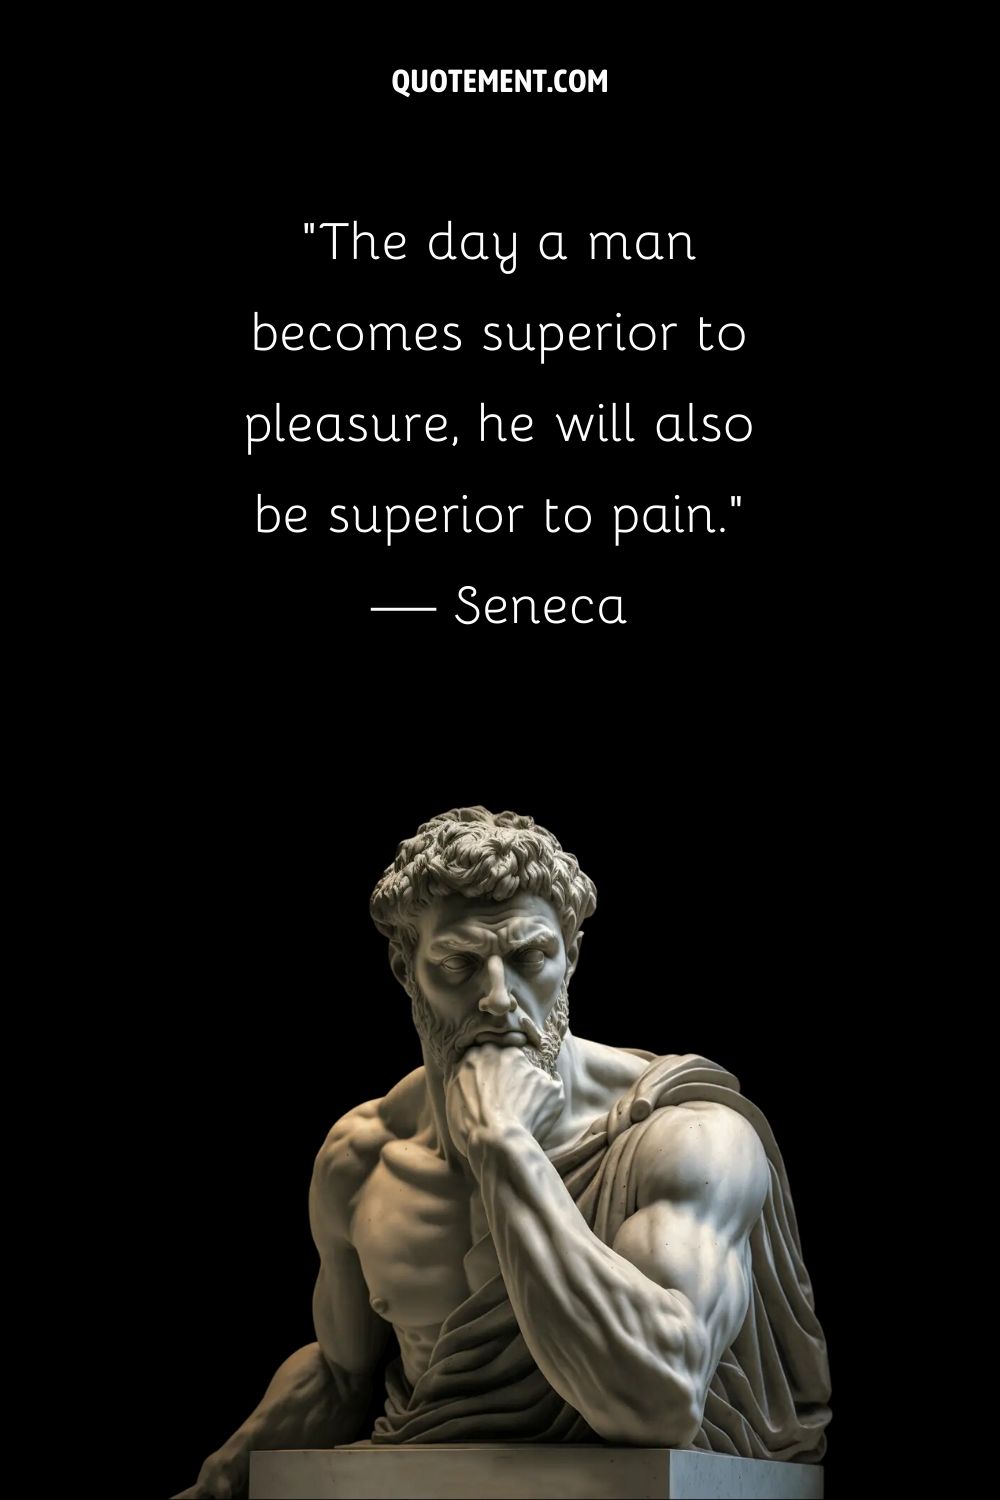 Image of a stoic figure representing the most influential stoic quote.